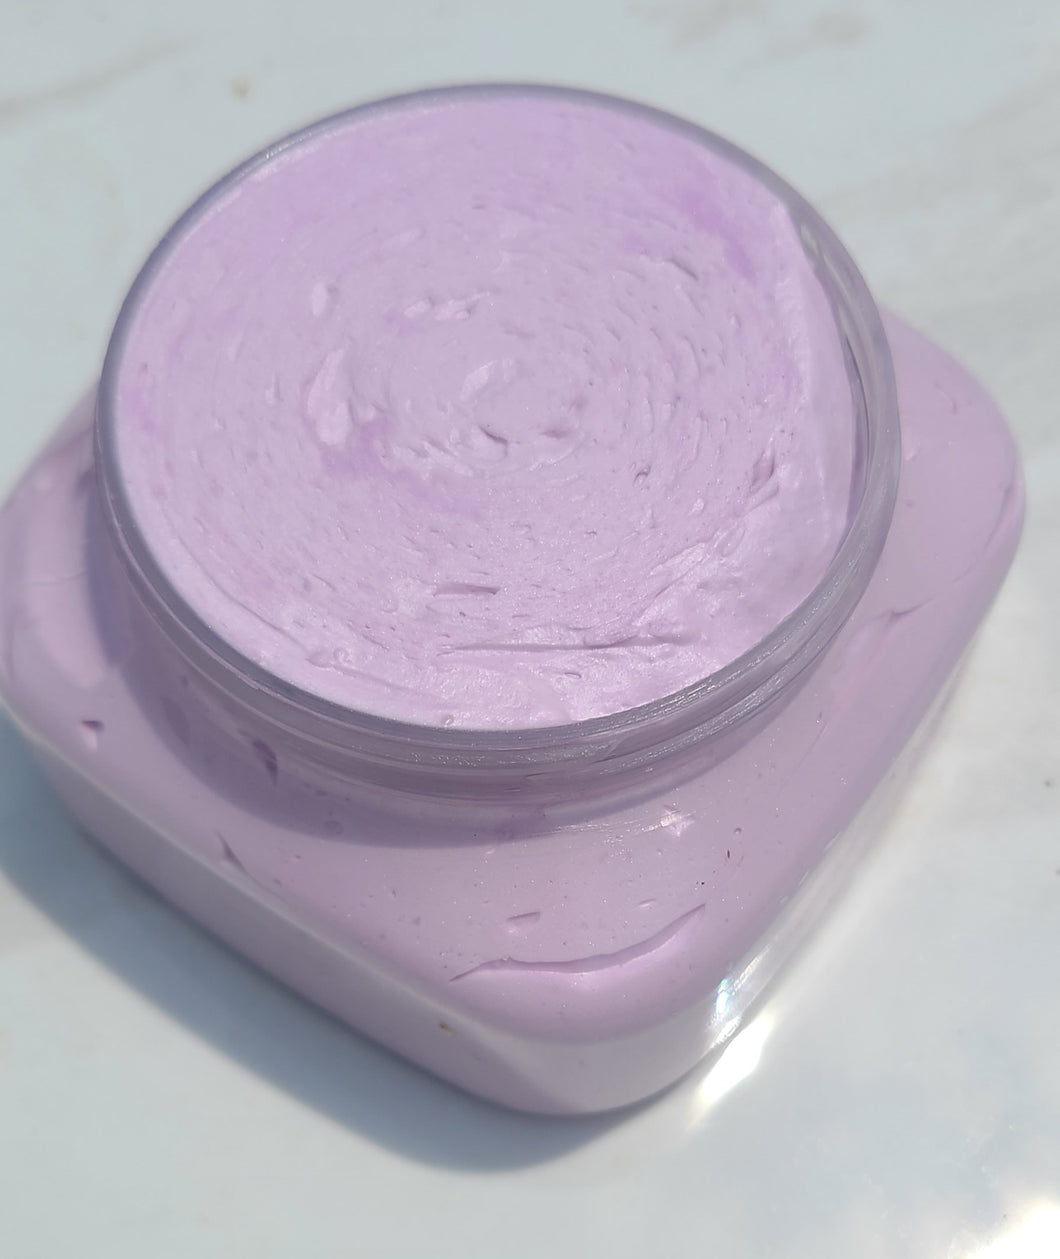 Body butter-Candy inspired by Prada